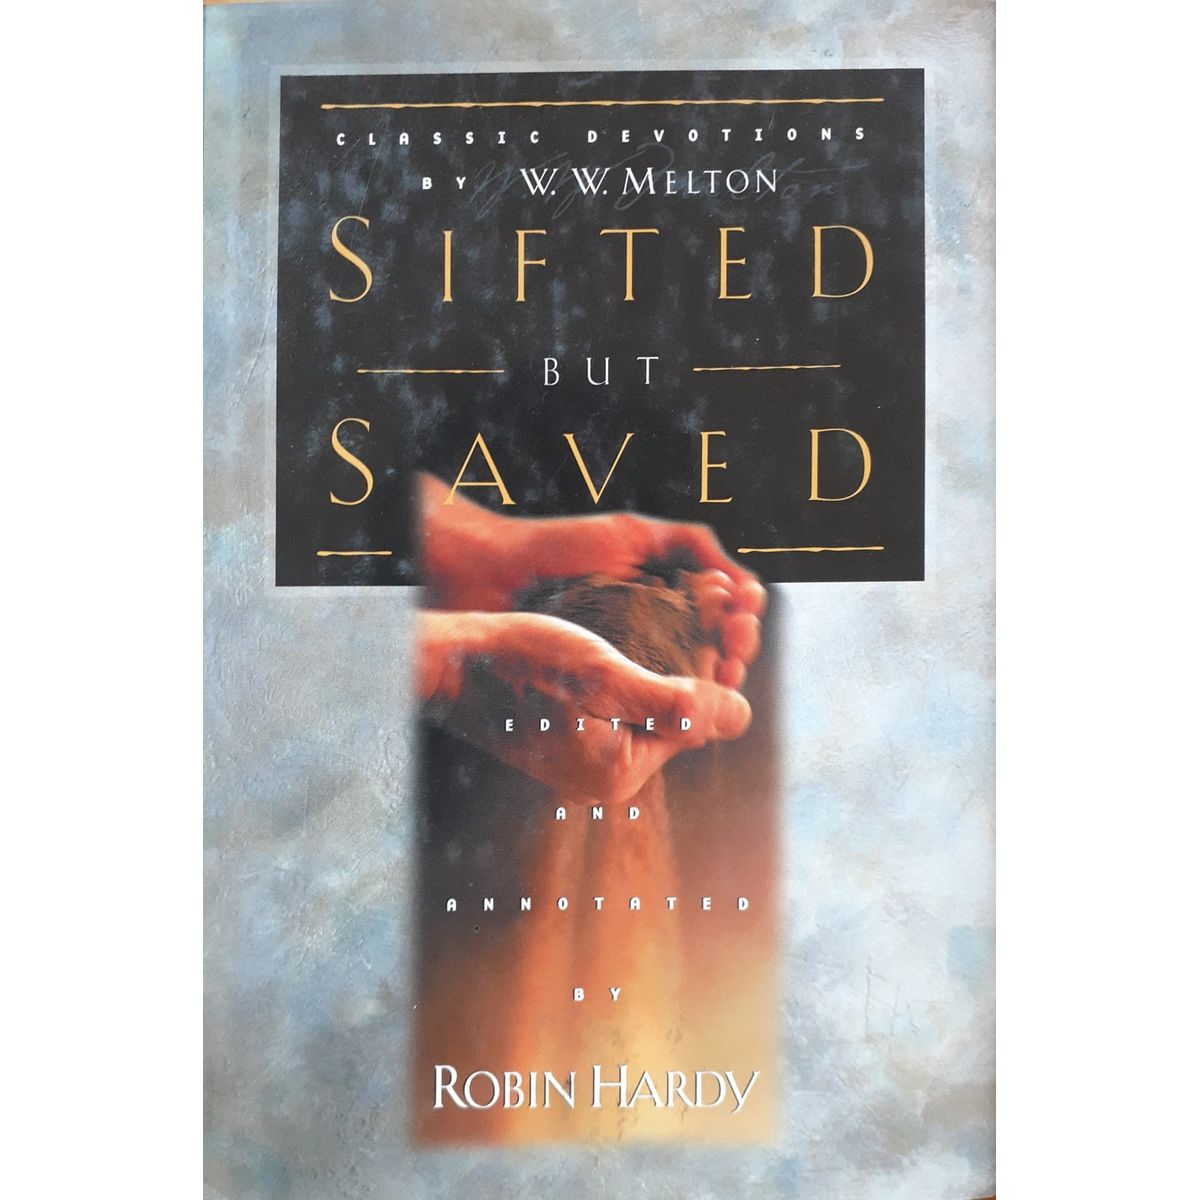 ISBN: 9780805424256 / 0805424253 - Sifted but Saved by W.W. Melton [2001]